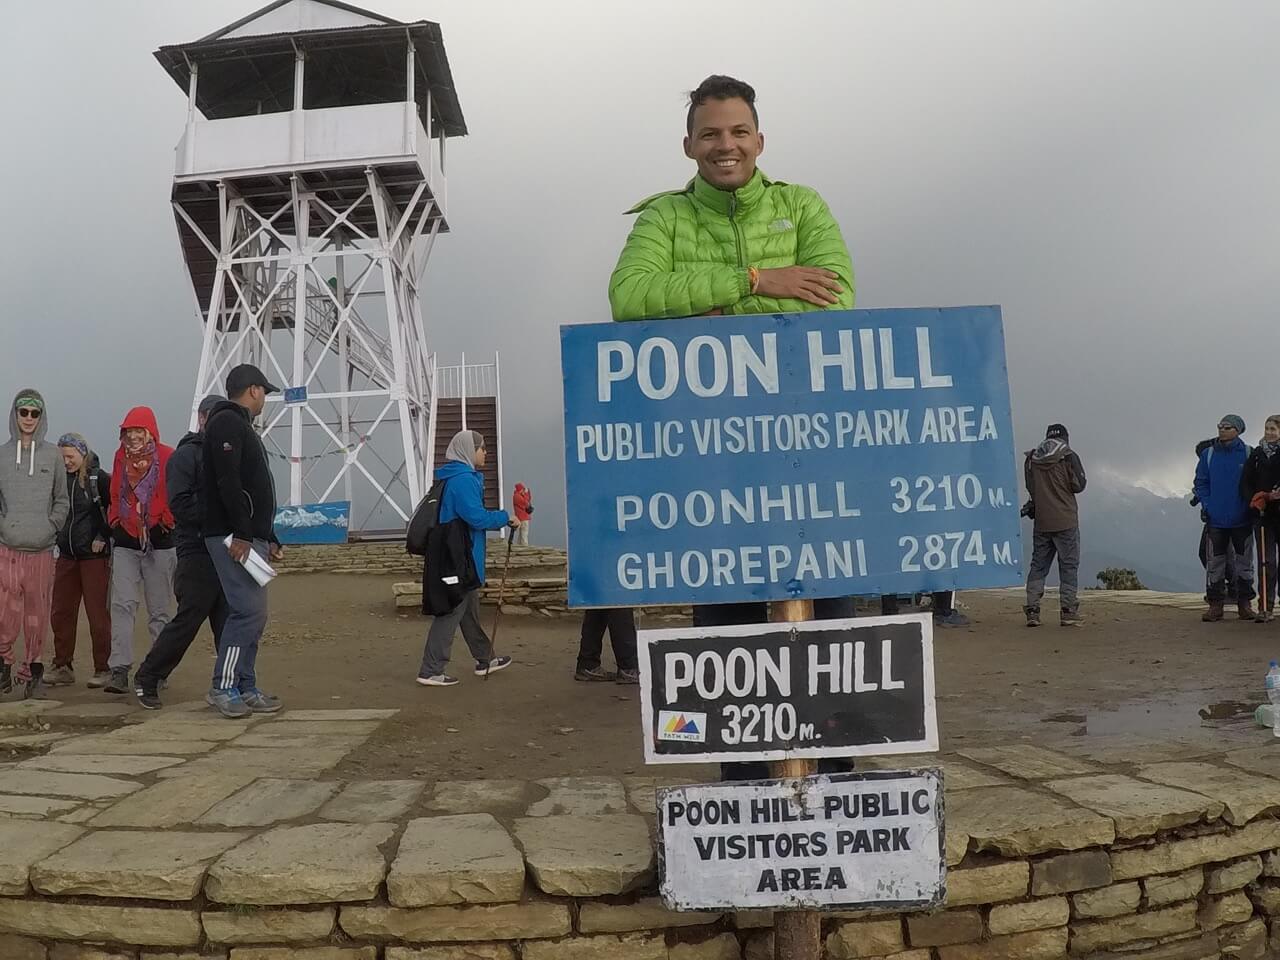 Pericles Rosa wearing a light-green jacket and some other people at Poon Hill Public Visitors Park Area on the top of Poon Hill Mountain leaning on a blue sign and a white tower that servers as a viewpoint in the background